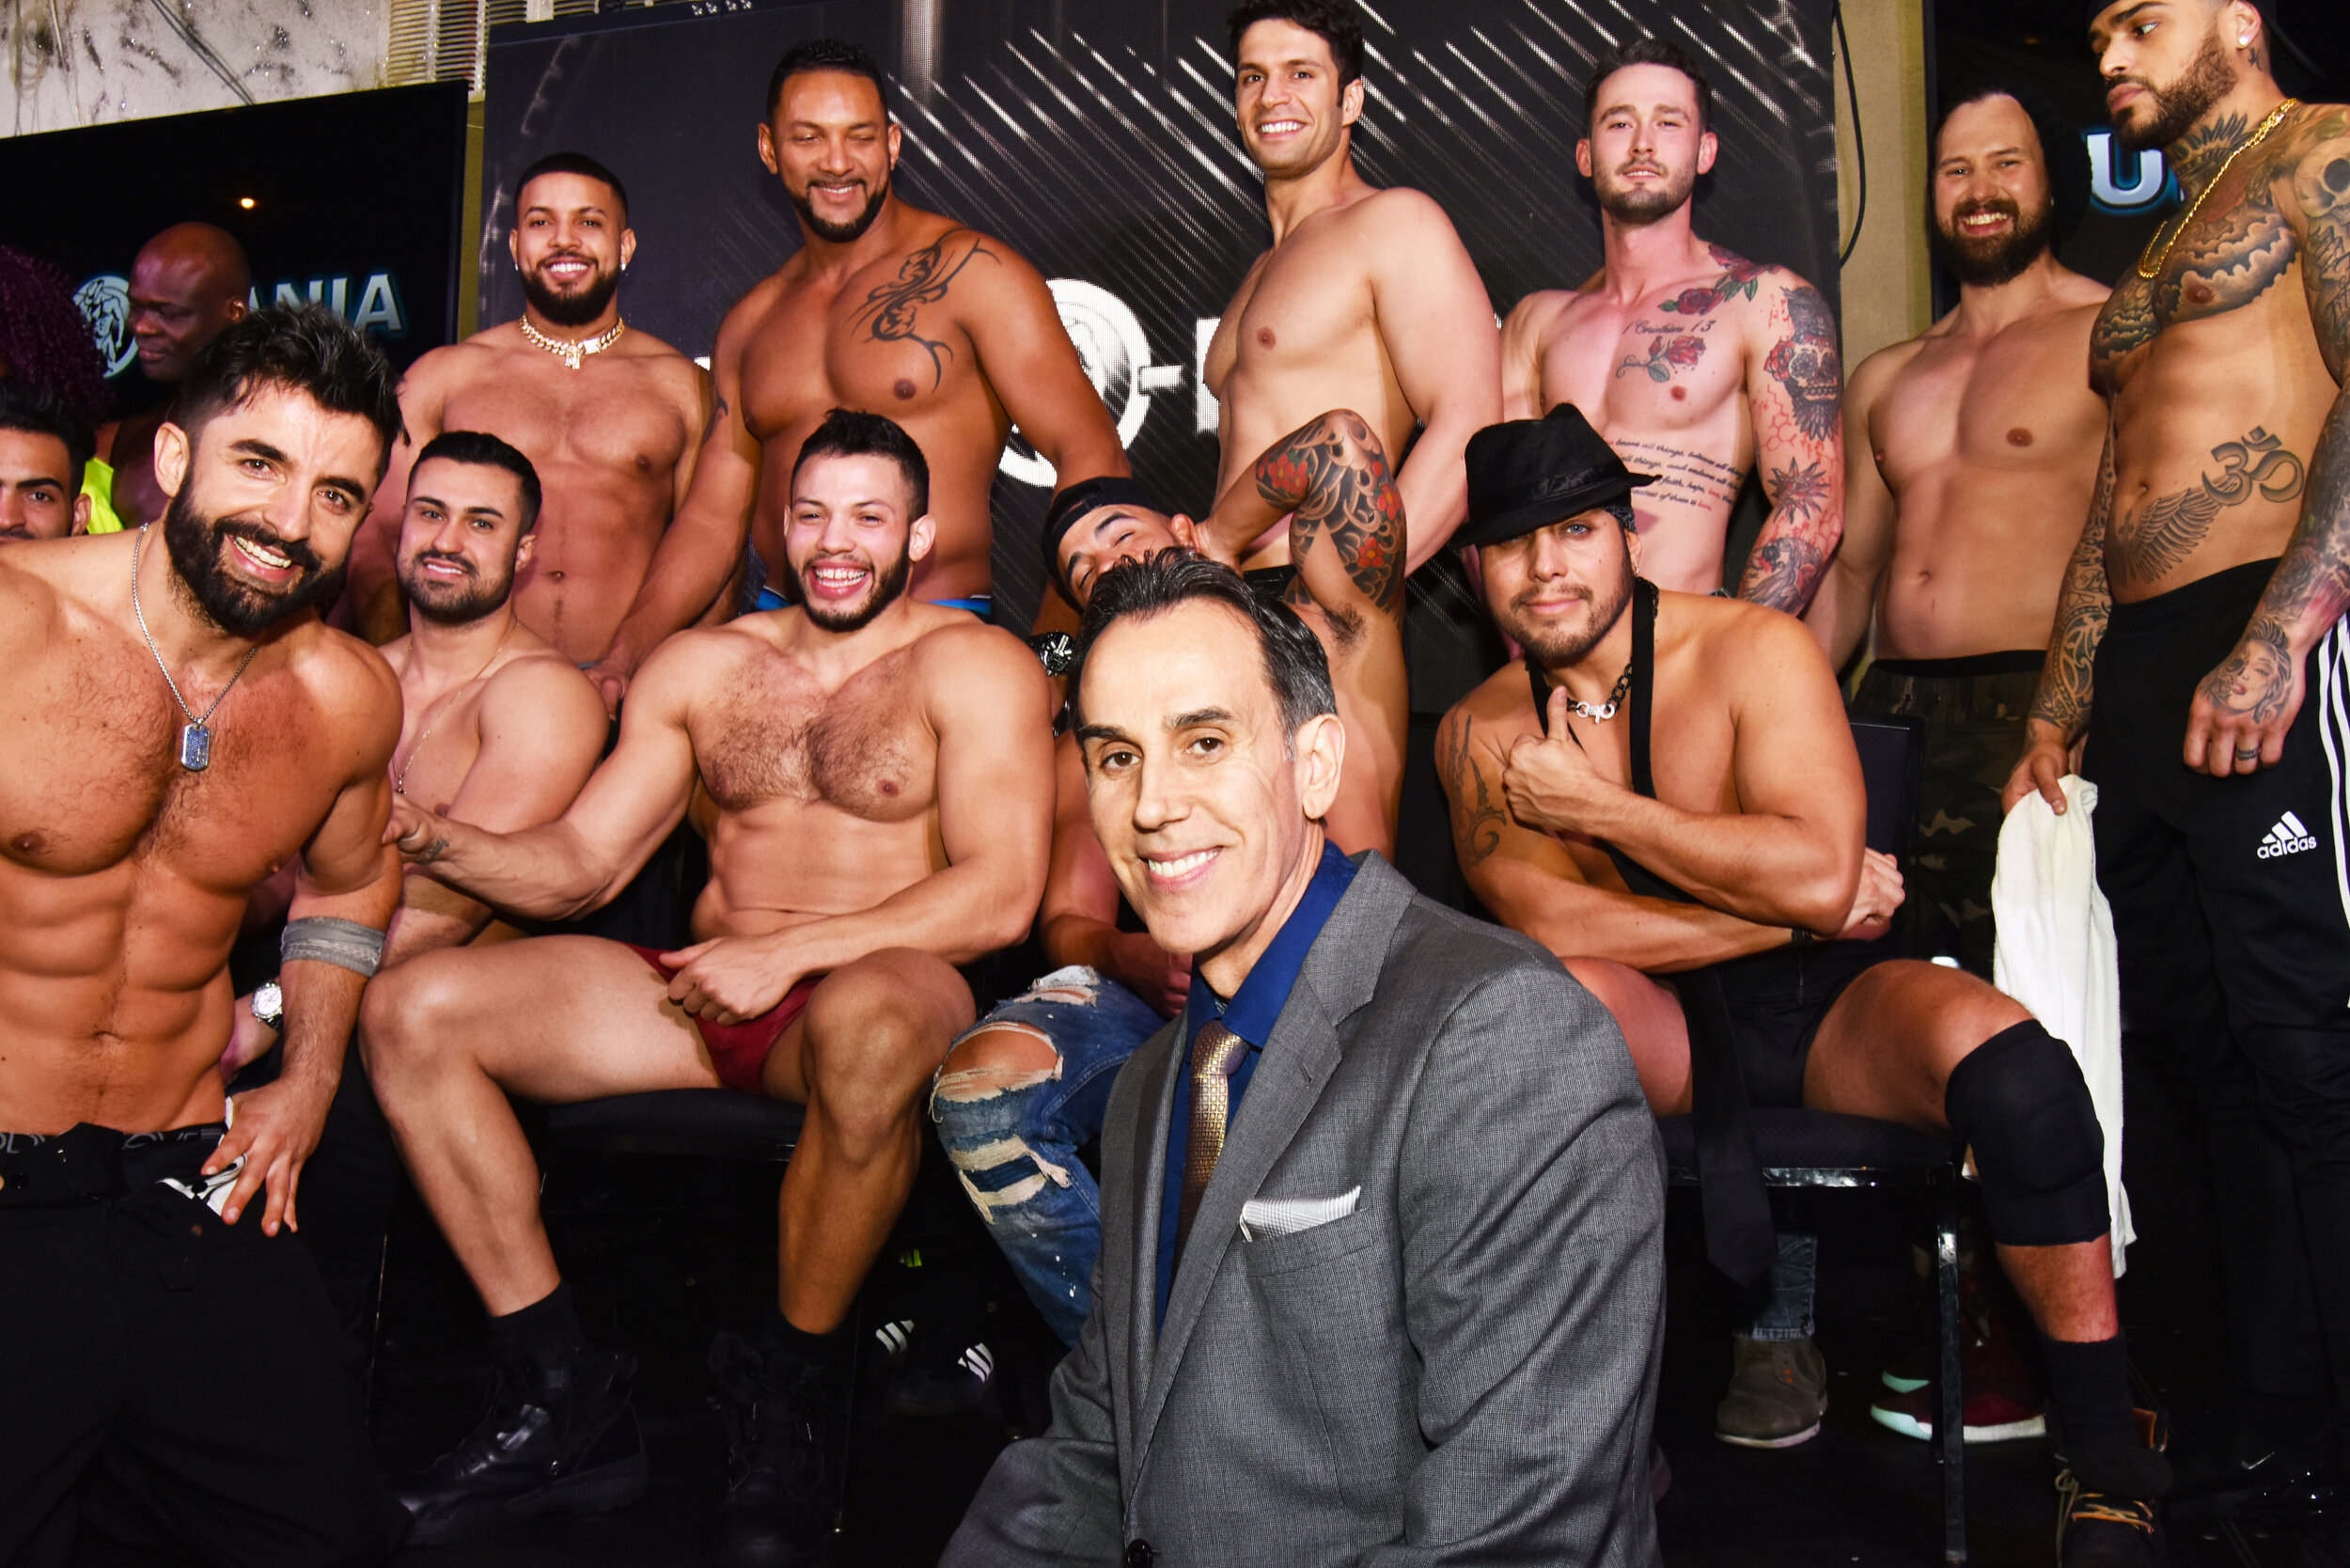  Armand Peri is the founder of Hunk-O-Mania, a strip club for women.  